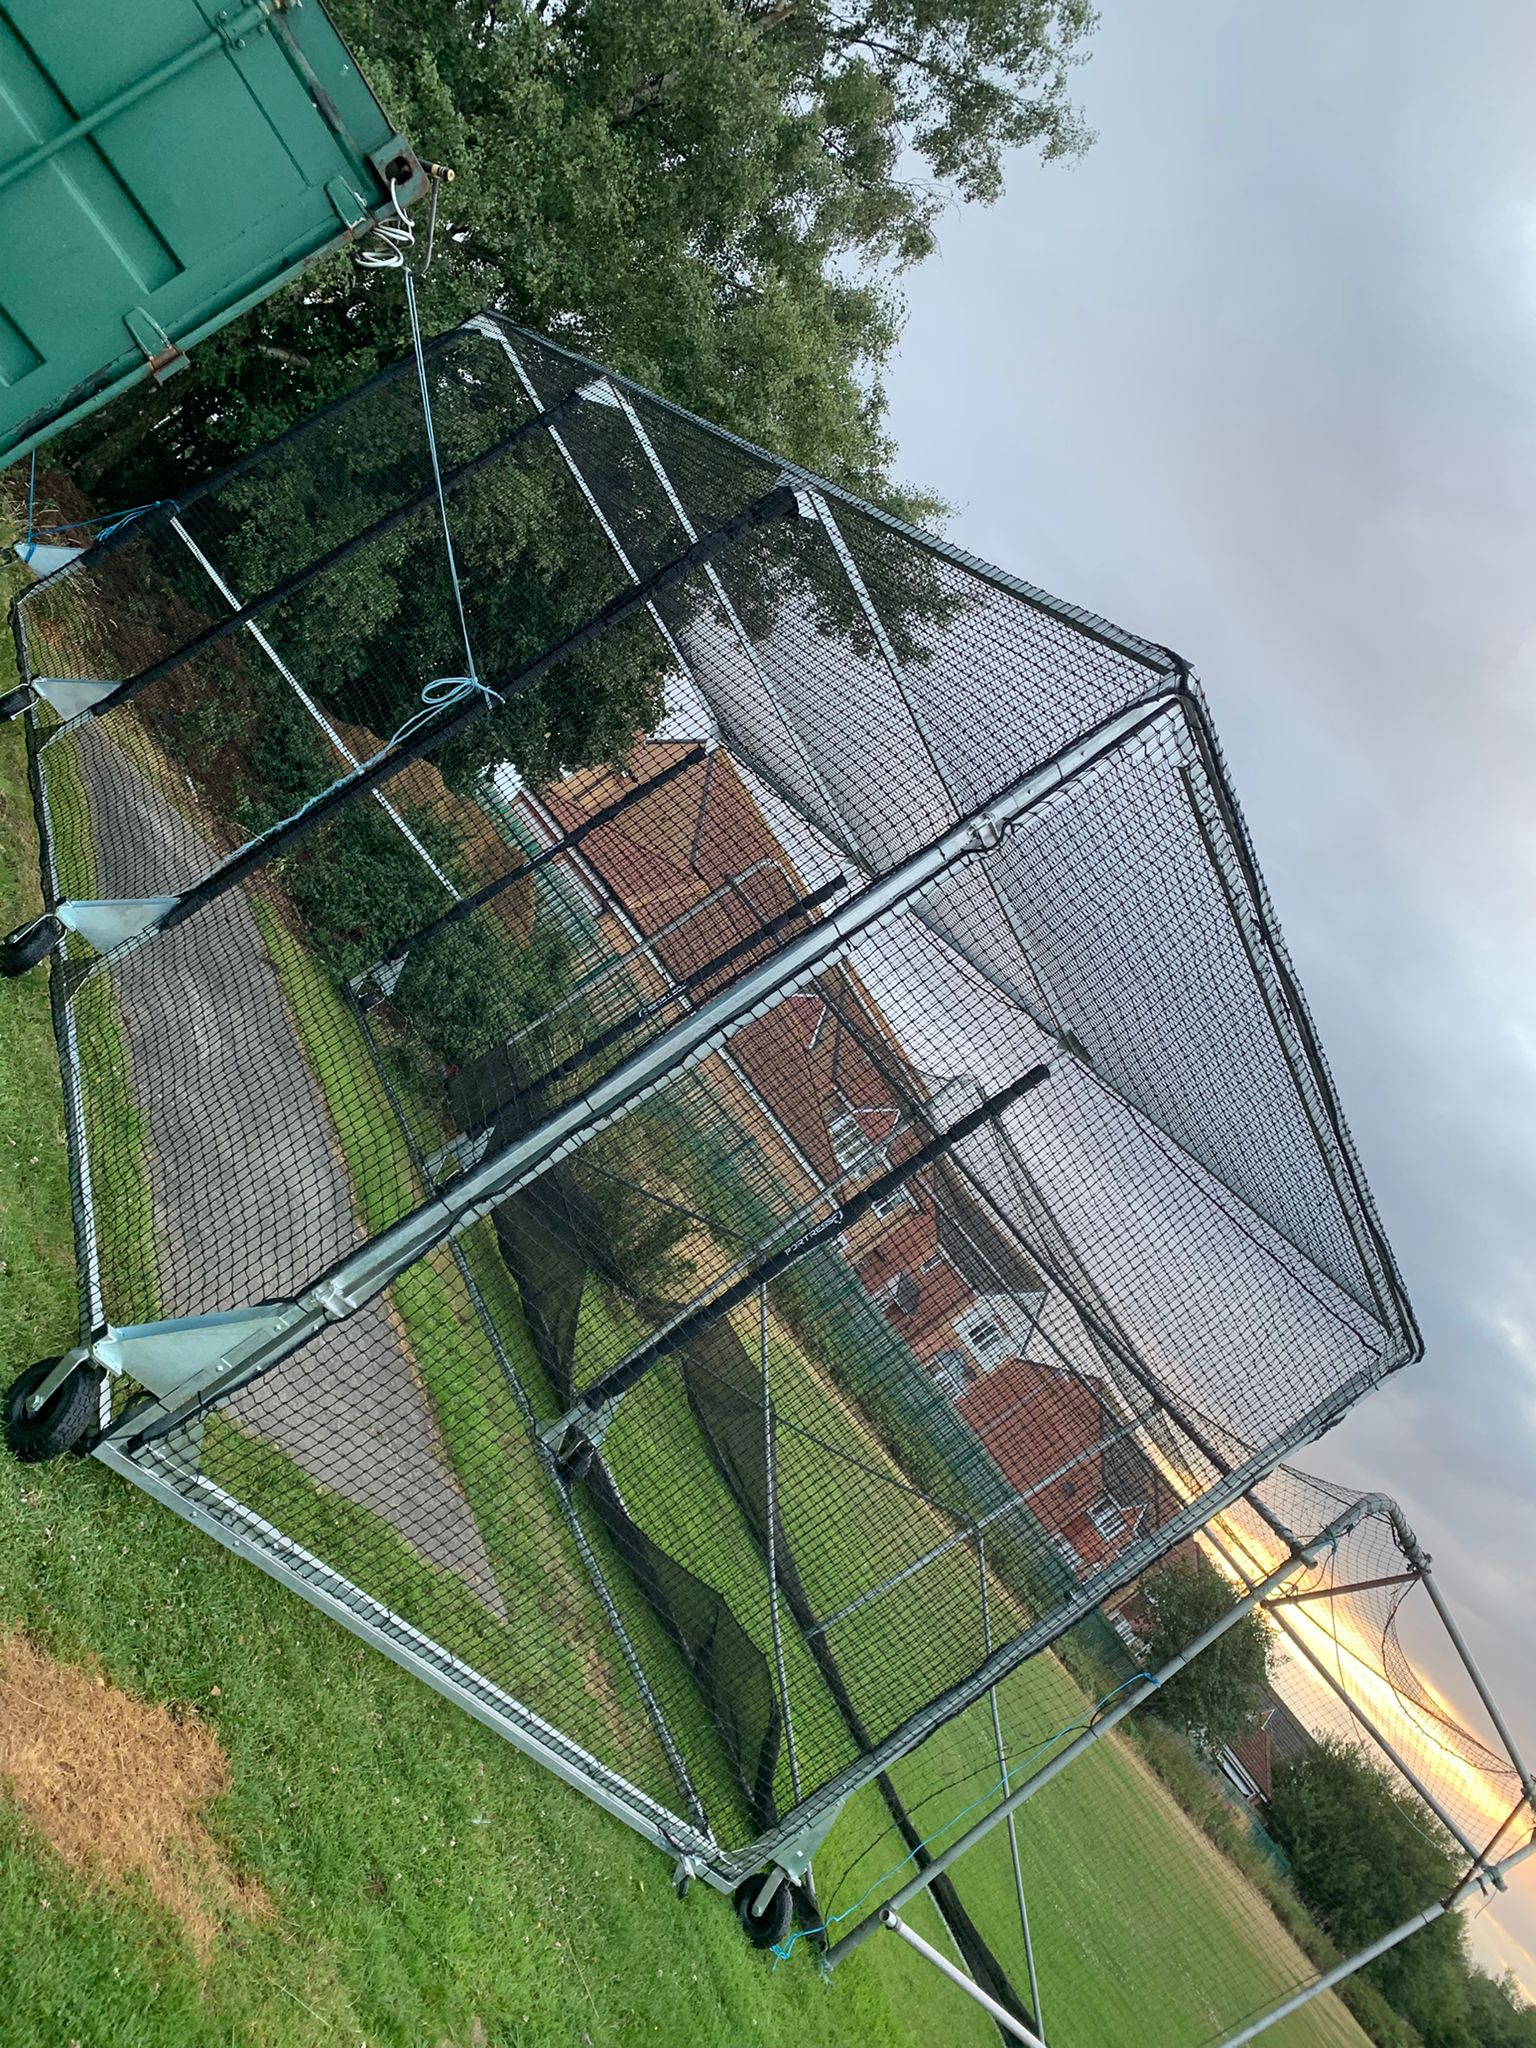 Ashington Rugby Cricket Club are bowled over by their new practice cage